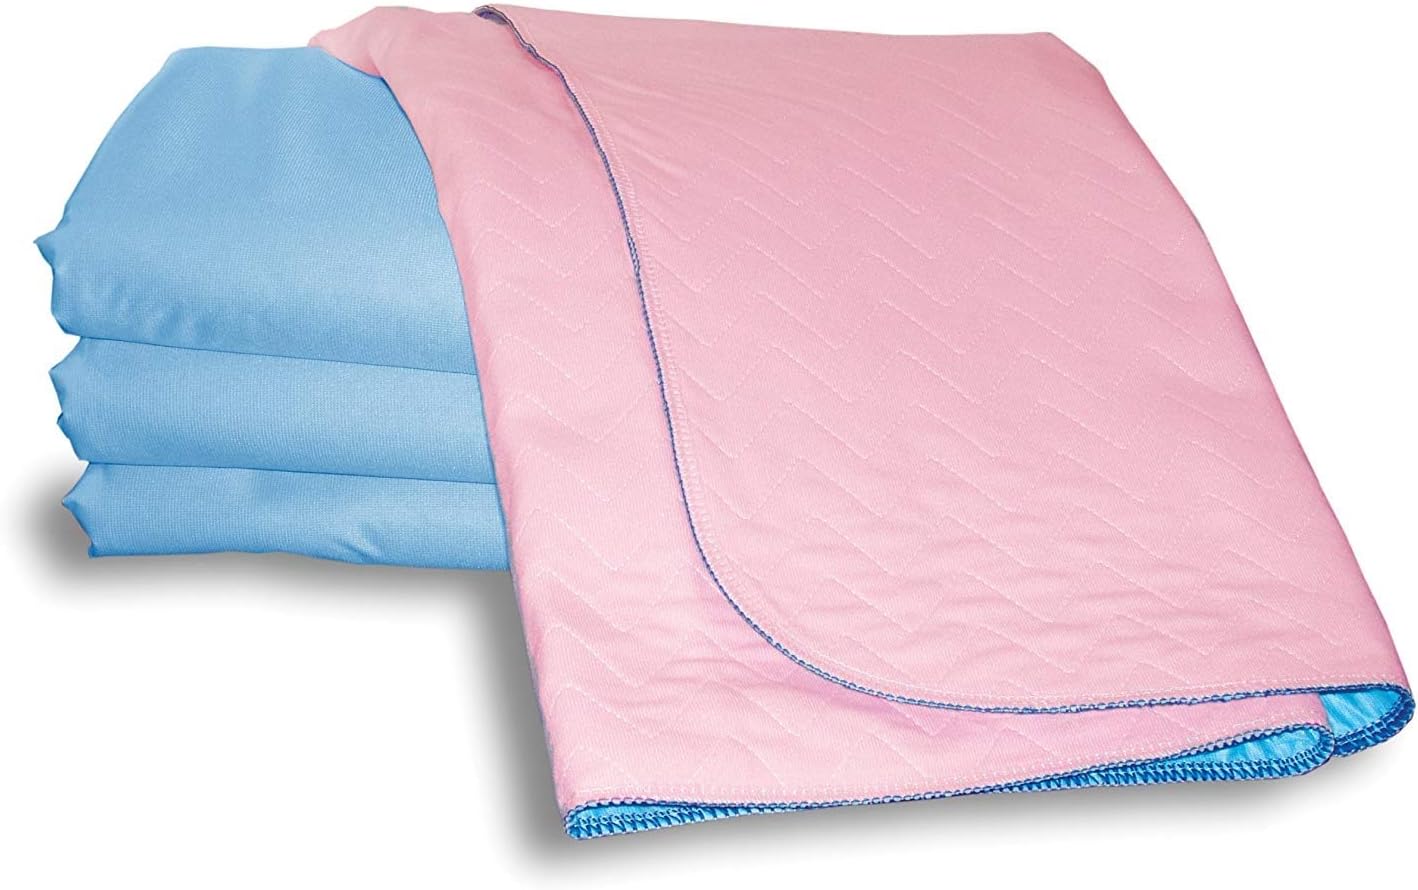 Washable Bed Protector/Pad without Tucks - Pack of 2